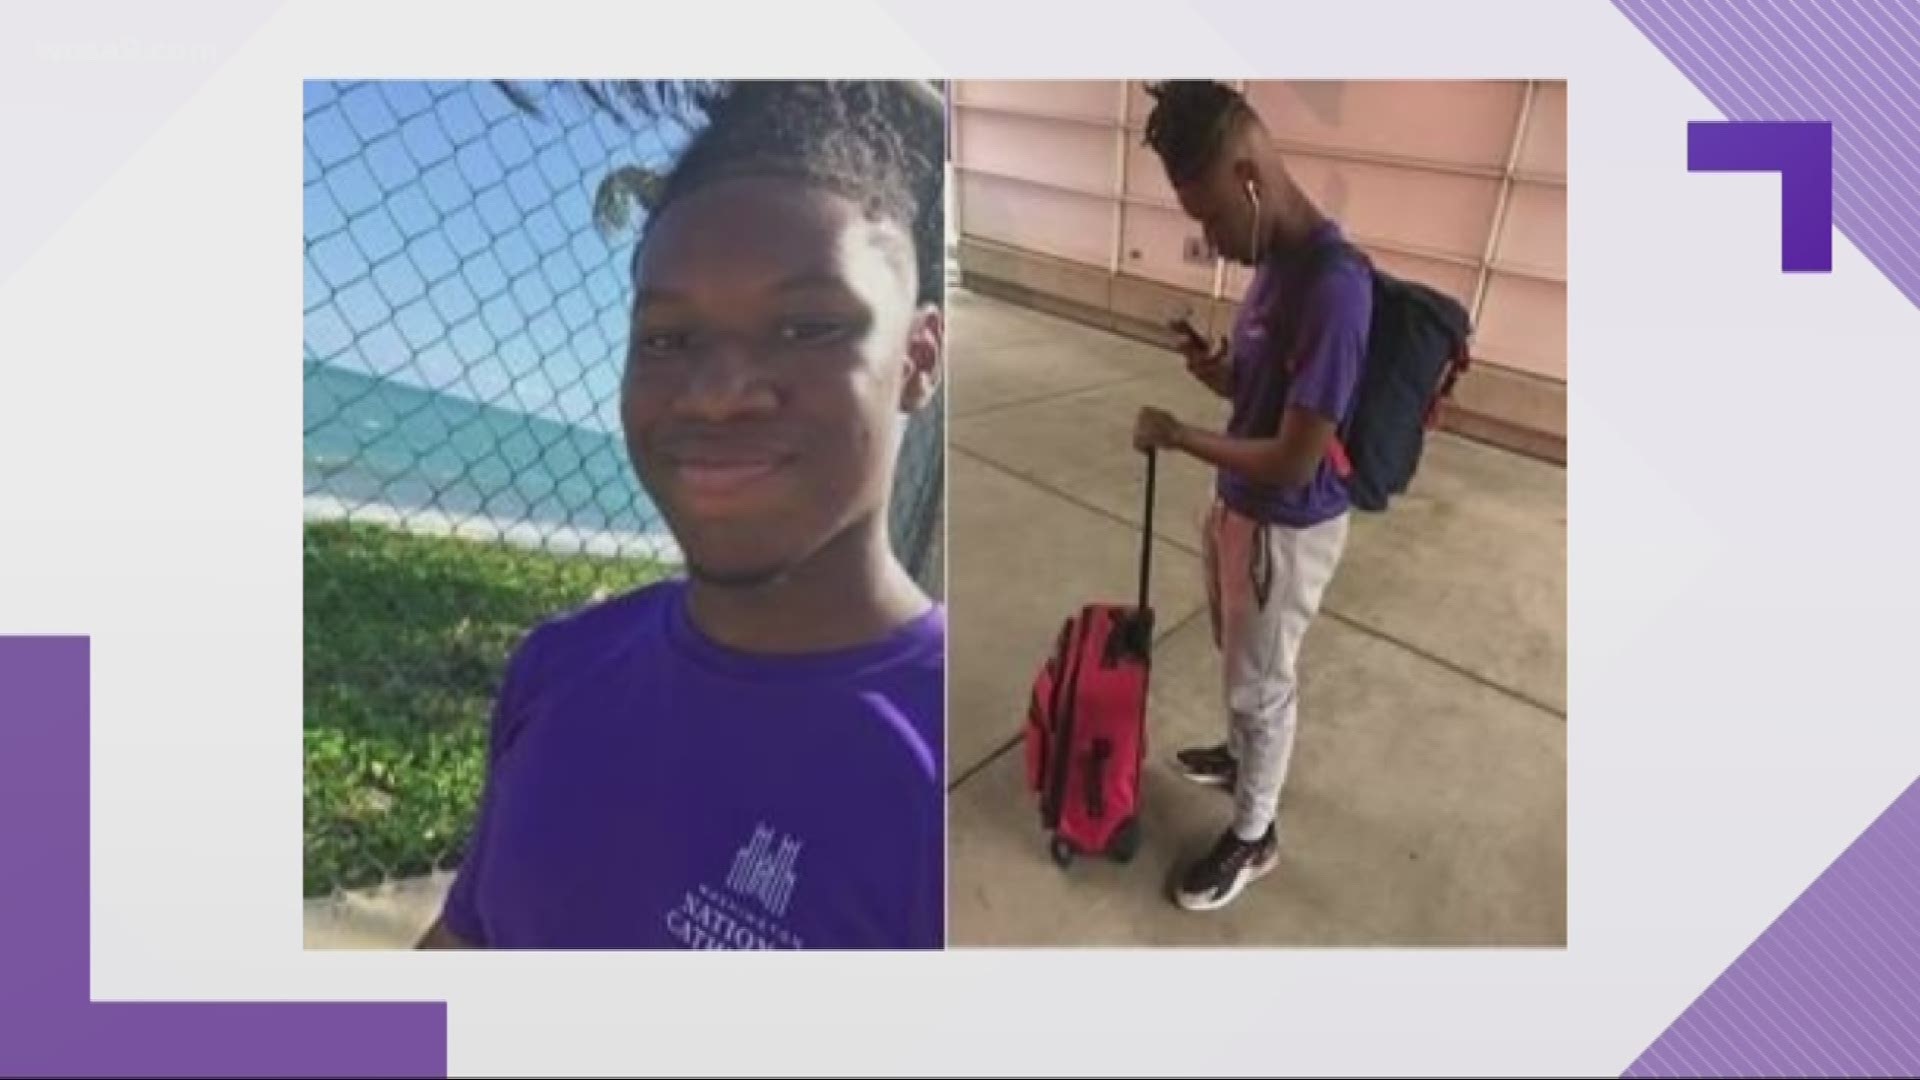 An urgent search is underway for a teenager from Prince George's County. This is 16-year-old Tony Grady-Rose. Police say he disappeared from home sometime overnight in the 5700 block of Cypress Creek Drive in Chillum.